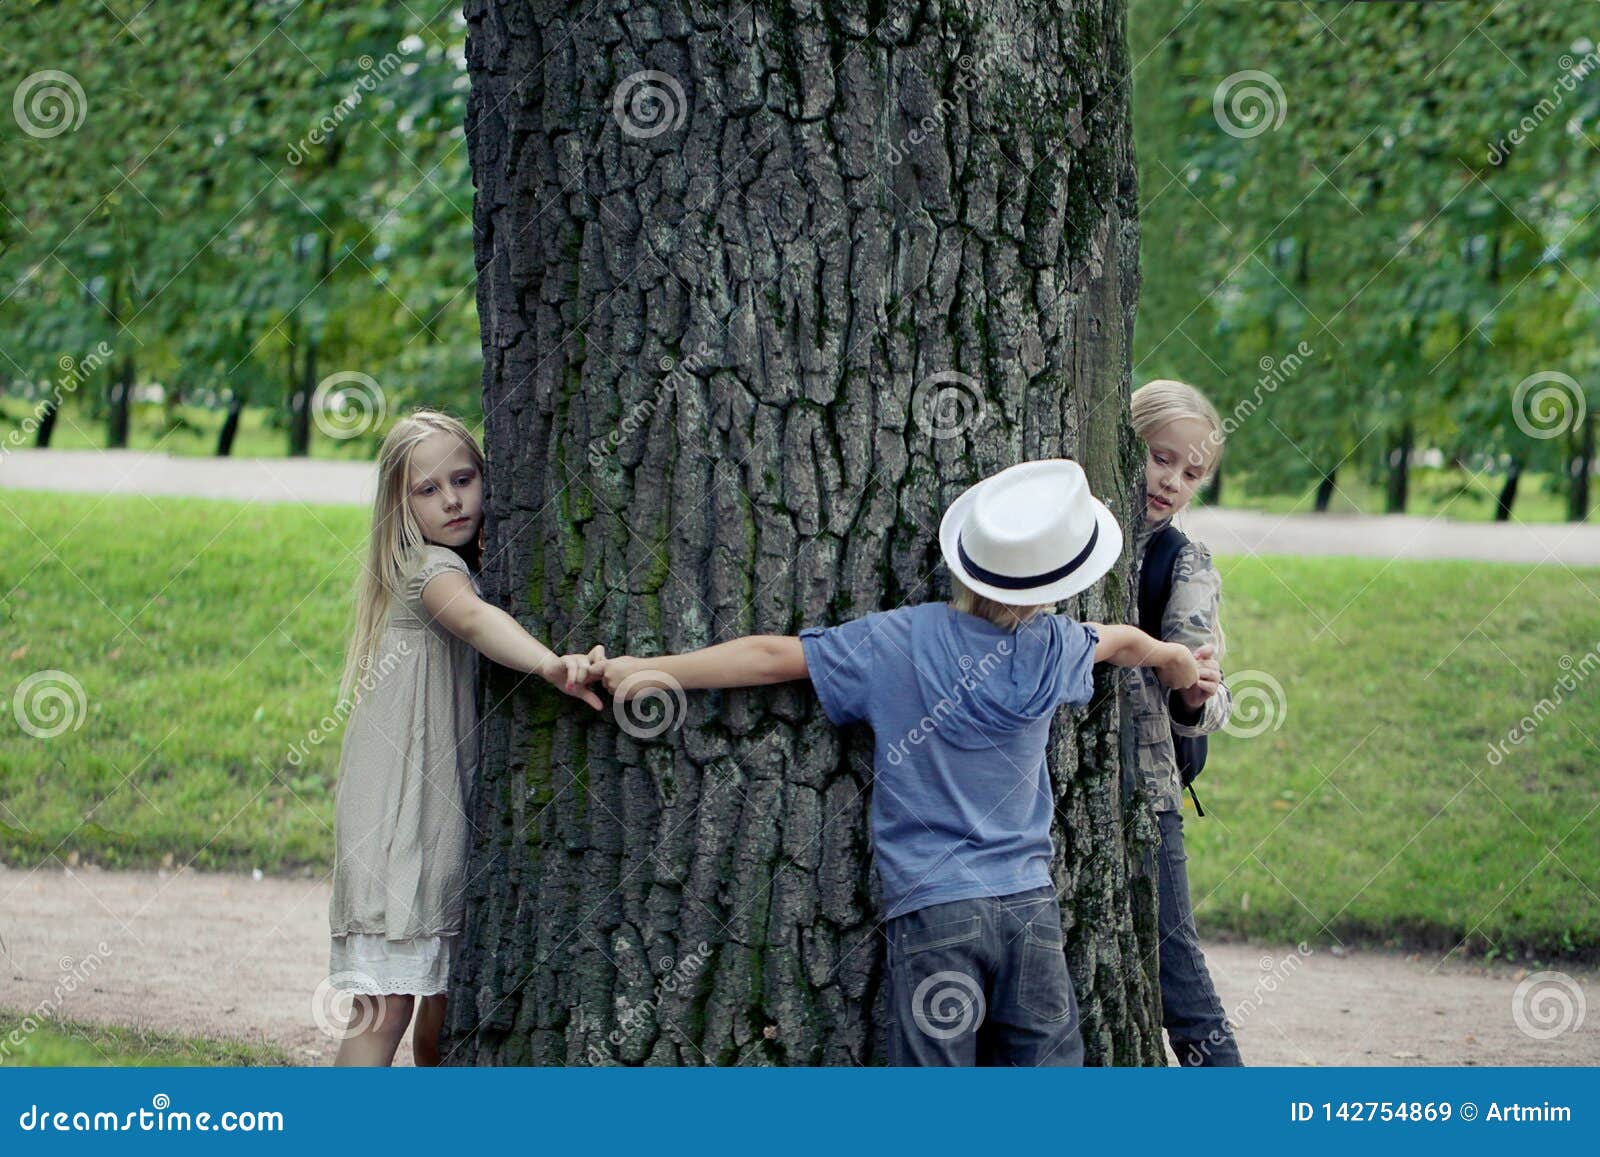 Children Embracing Tree. Environmental Protection Outdoor Nature Stock